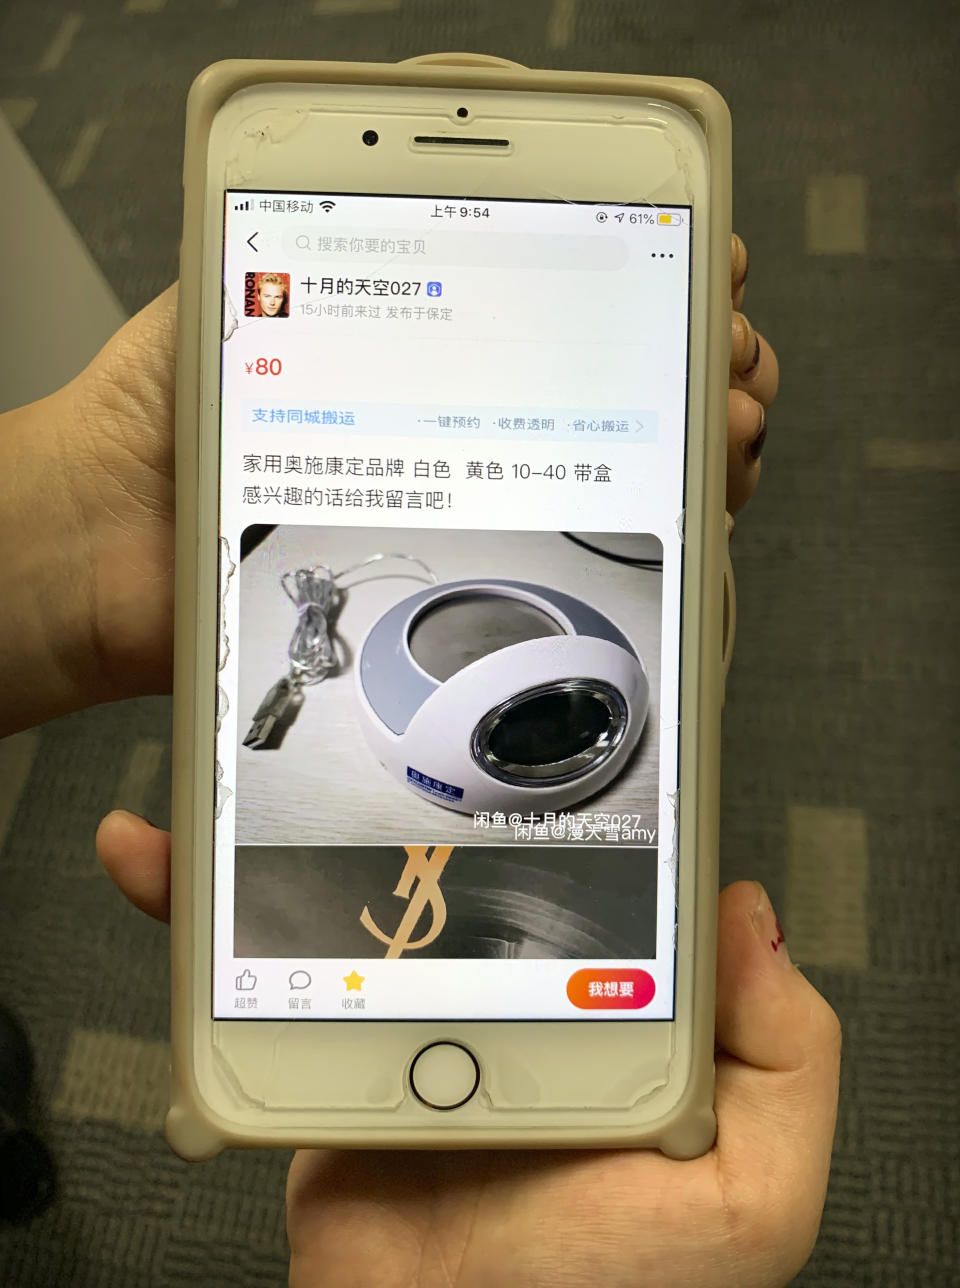 In this Dec. 24, 2019 photo, a listing using bogus product photos from a vendor offering OxyContin pills for sale on Xianyu, Alibaba's online second-hand marketplace, is seen on a smartphone in Shanghai, China. Officially, pain pill addiction is an American problem, not a Chinese one. But people in China have fallen into opioid abuse the same way many Americans did, through a doctor's prescription. And despite China's strict regulations, online trafficking networks, which facilitated the spread of opioids in the U.S., also exist in China. The text of the ad reads "Home-use OxyContin brand white color yellow color 10-40 with box, if interested leave me a message!". (AP Photo/Erika Kinetz)